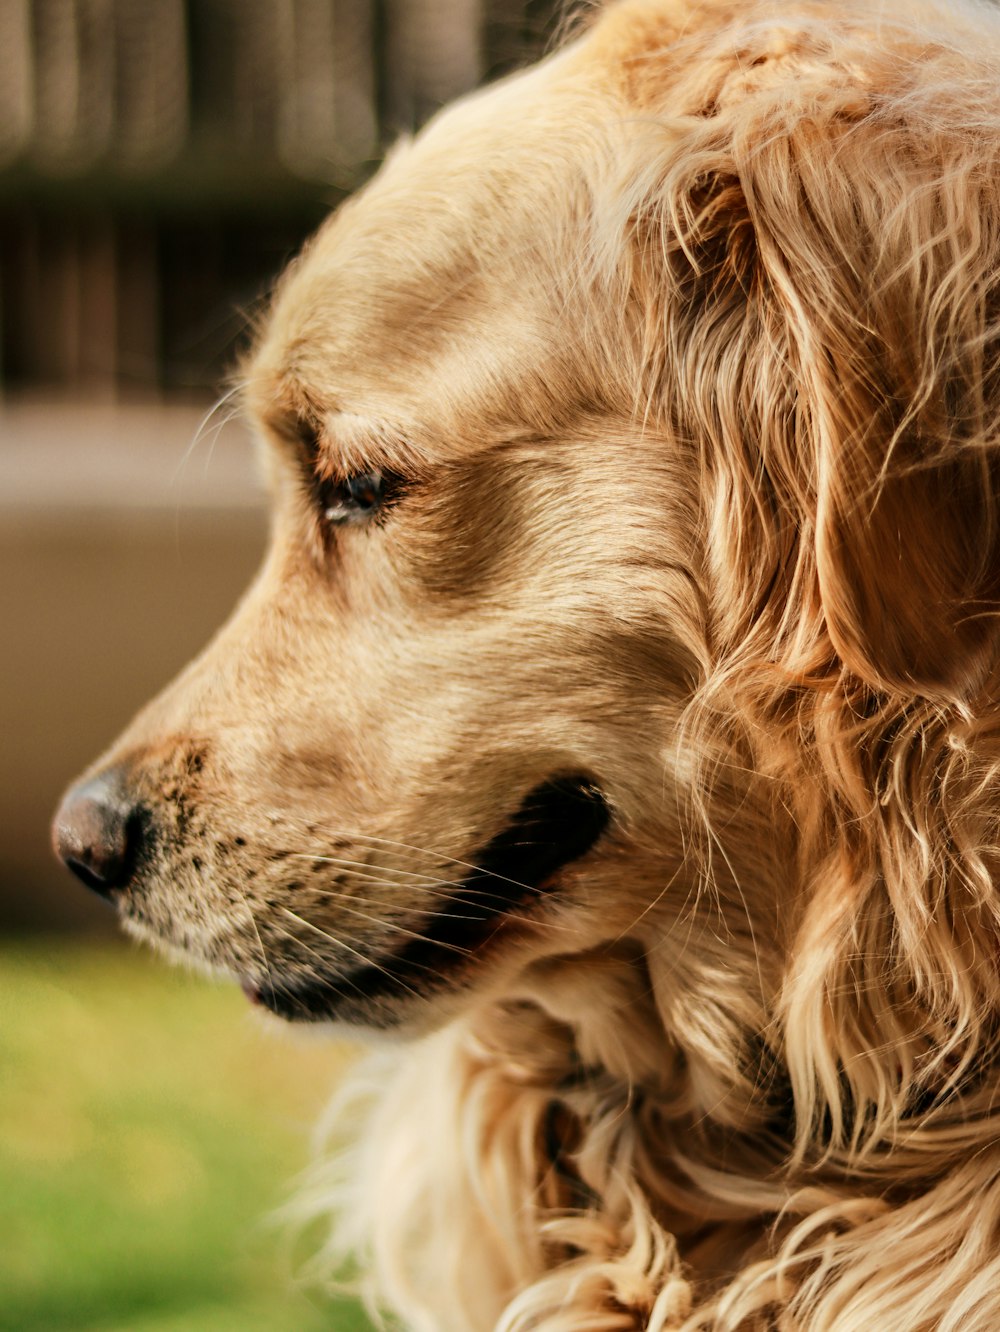 a close up of a dog's face with grass in the background